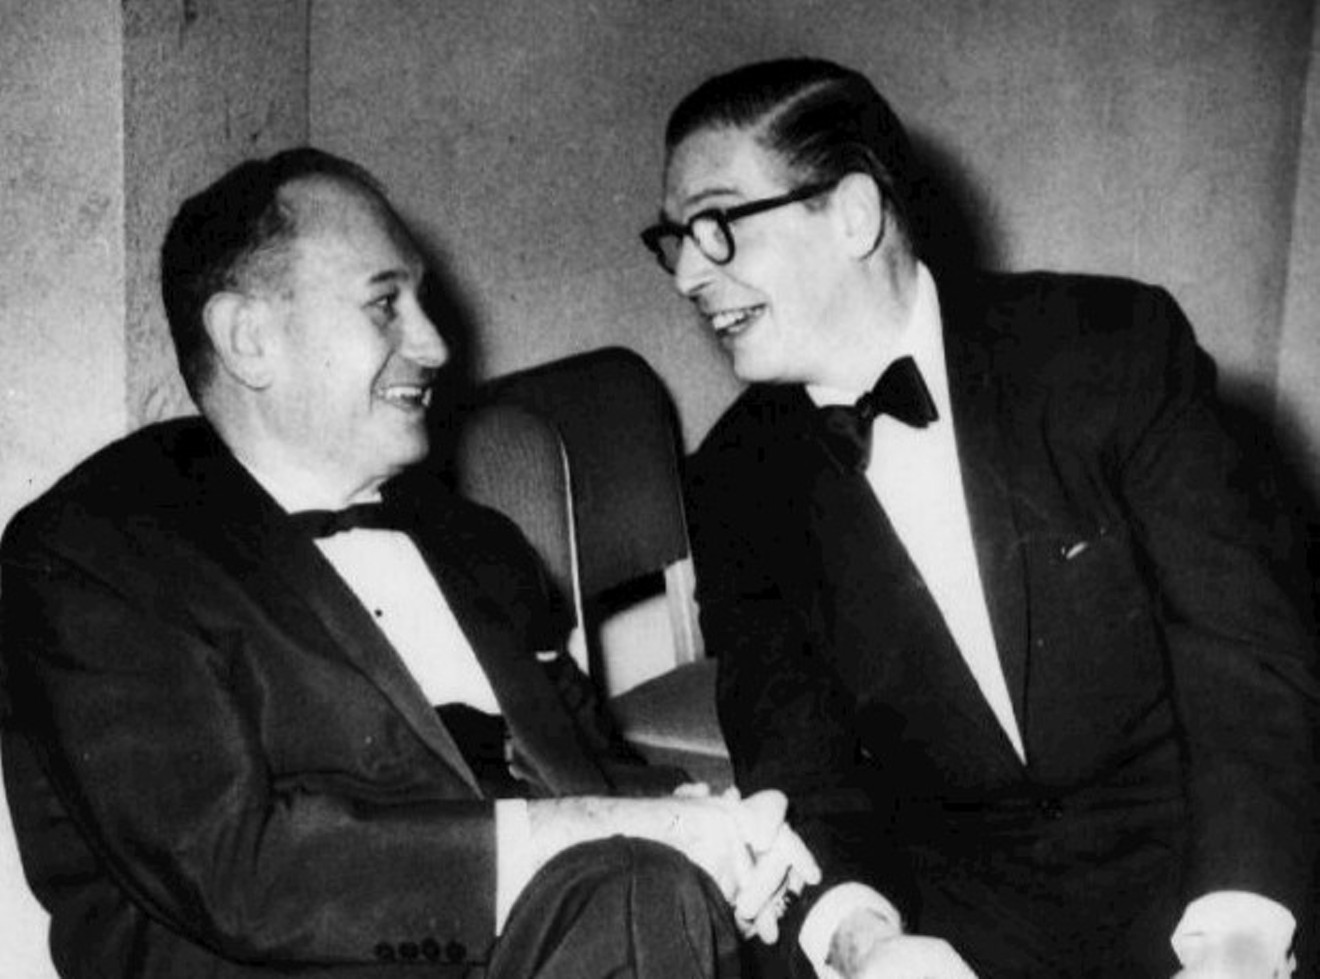 The last photo of Harry "Parkyakarkus" Einstein taken at a Los Angeles Friars' Club 
 dinner in 1958. He is shown conversing with Milton Berle. Shortly after this photo was 
 taken, Parke collapsed into Berle's lap from a fatal heart attack.